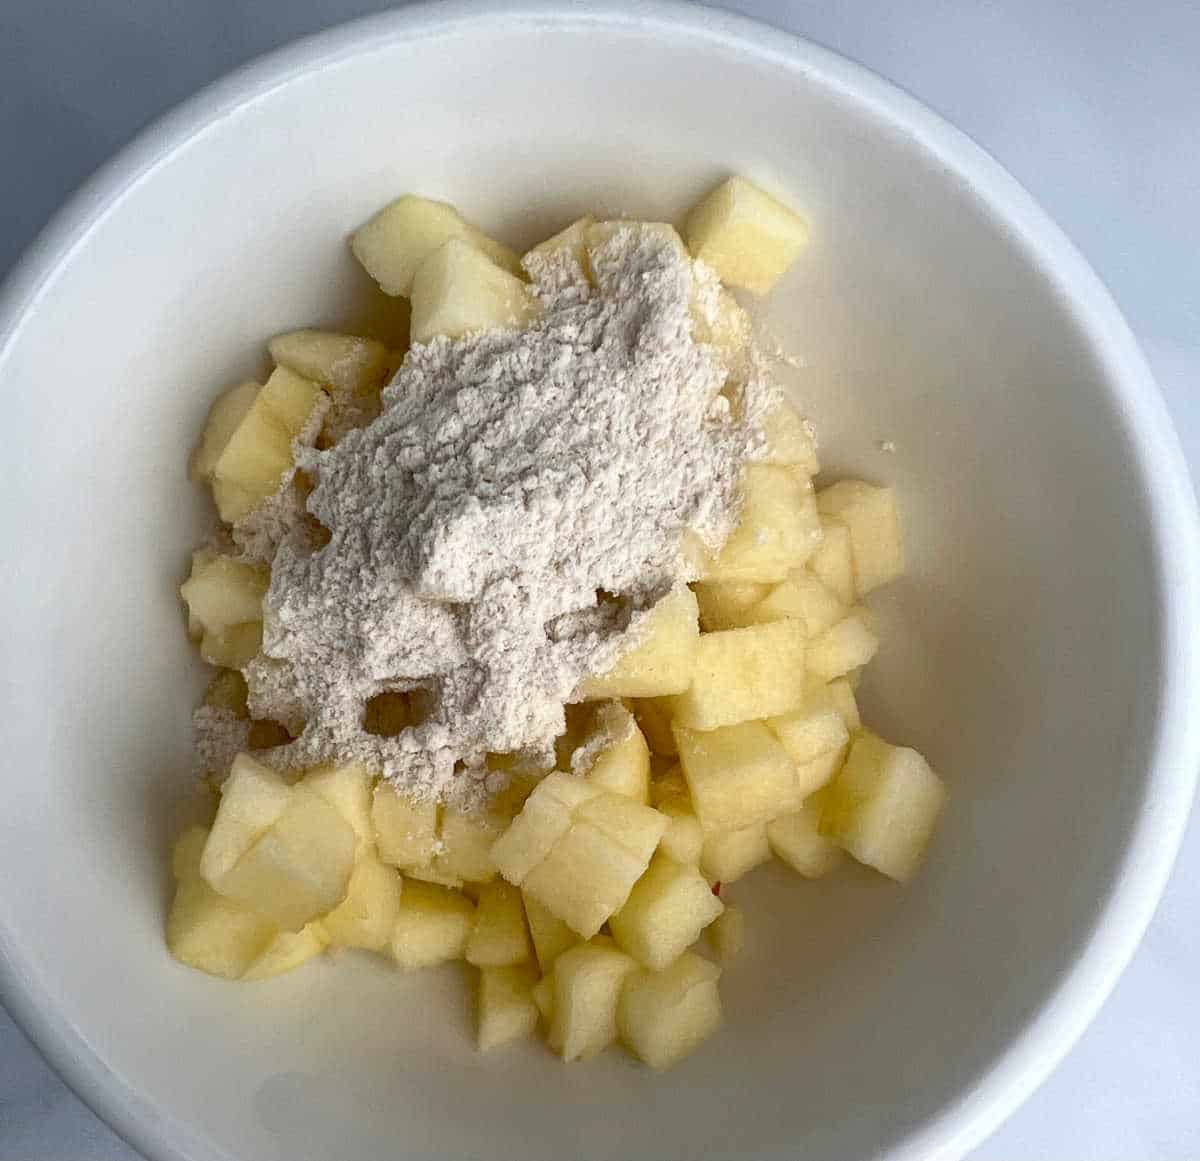 a spoonful of cake mix on top of chopped apples